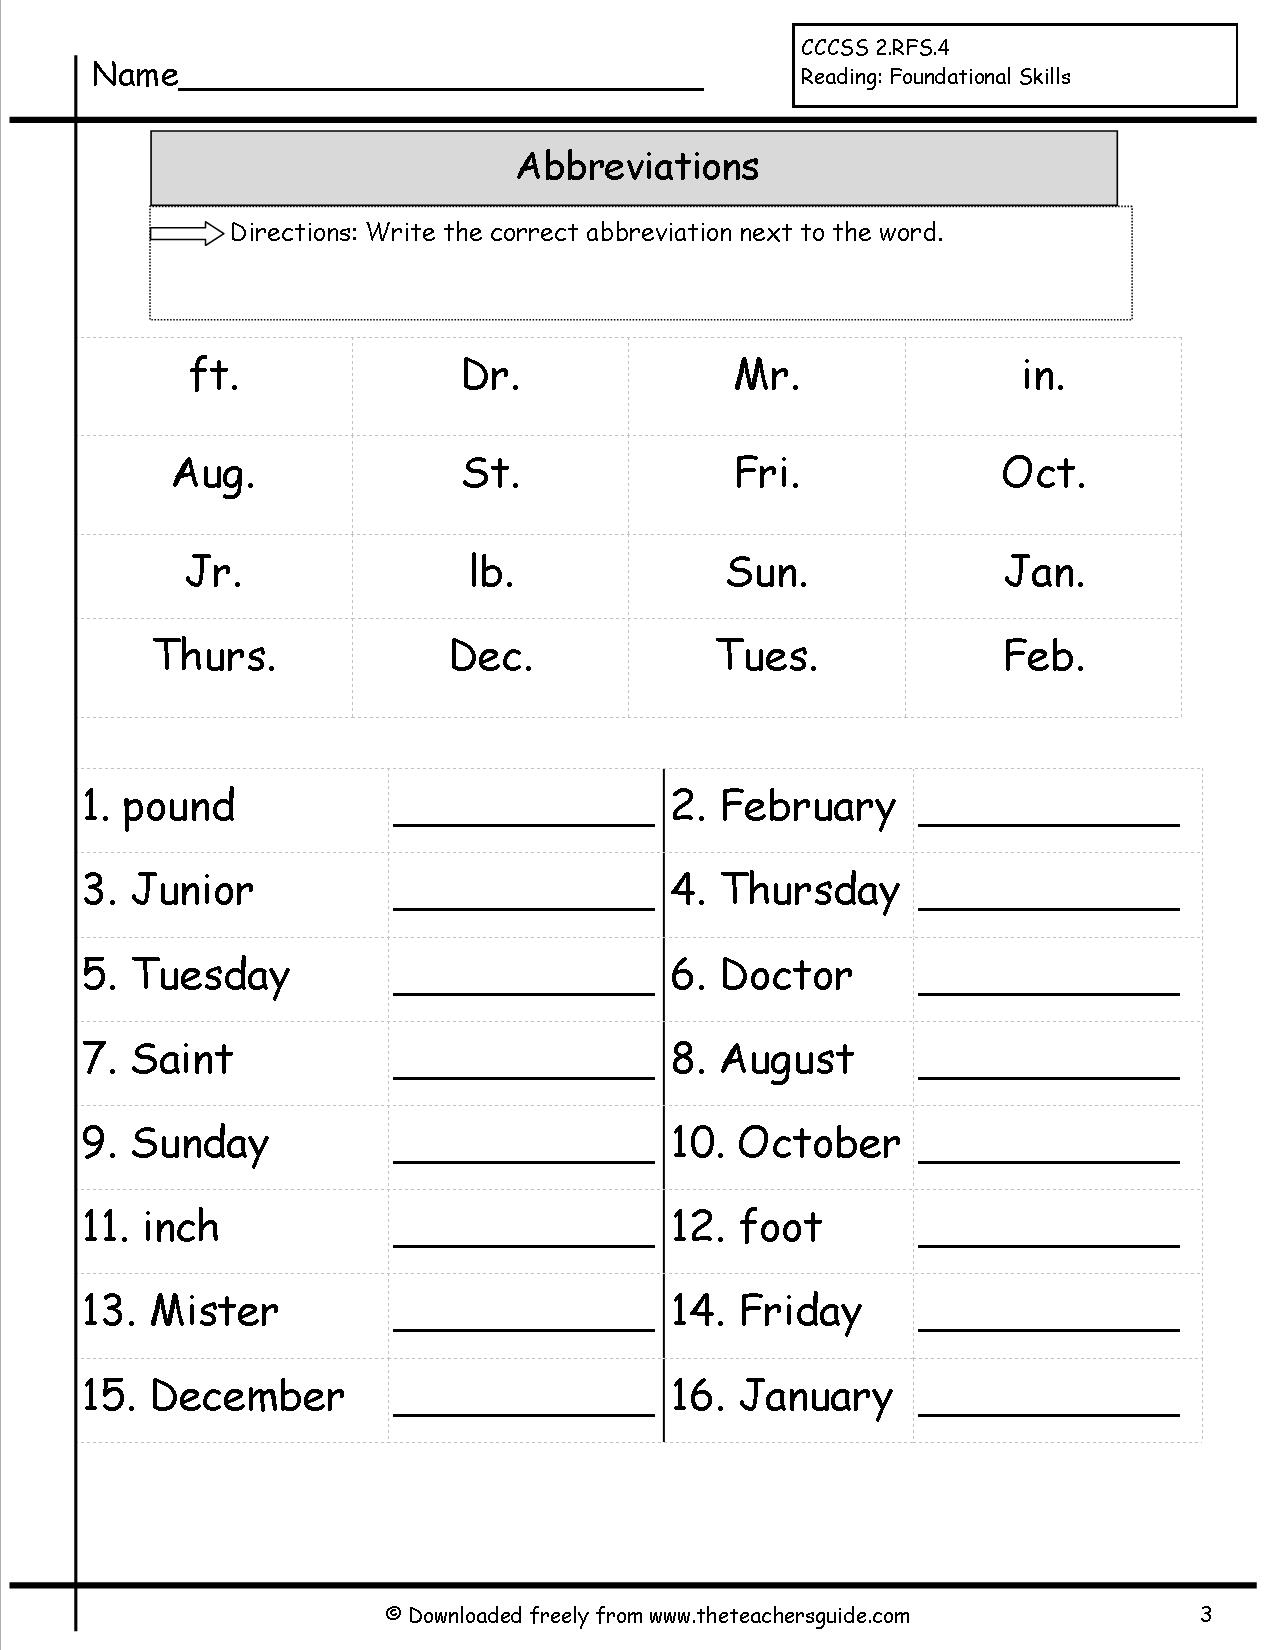 Abbreviations Worksheets Examples Definition For Kids Free Printable Abbreviation